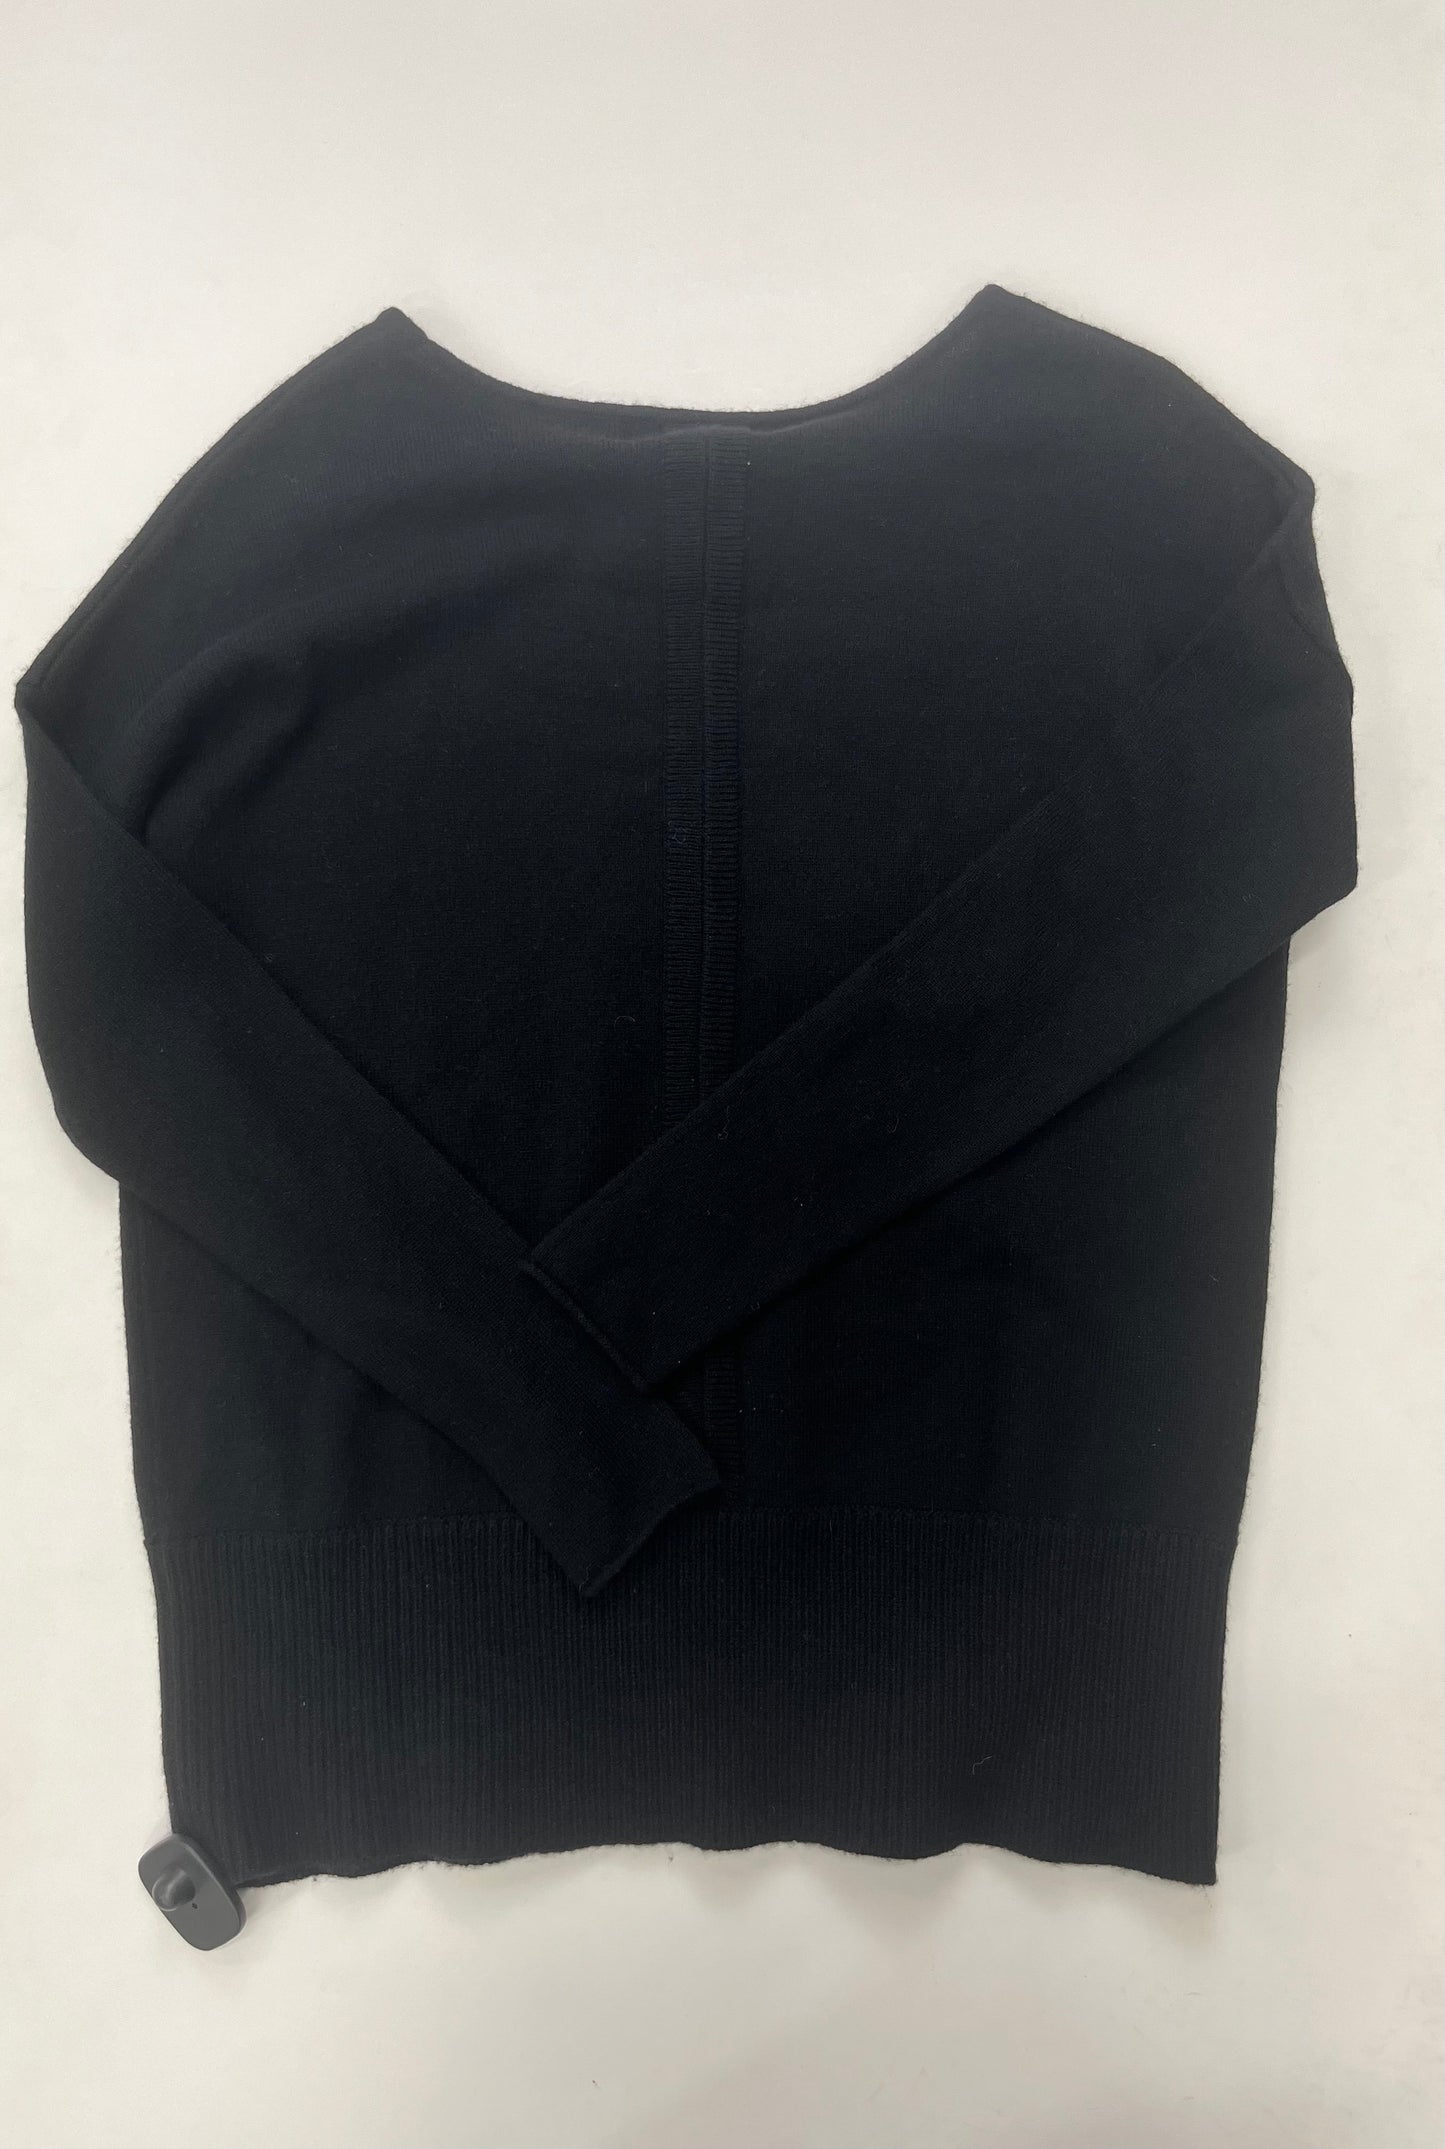 Black Sweater Cashmere Ply Cashmere, Size Xs